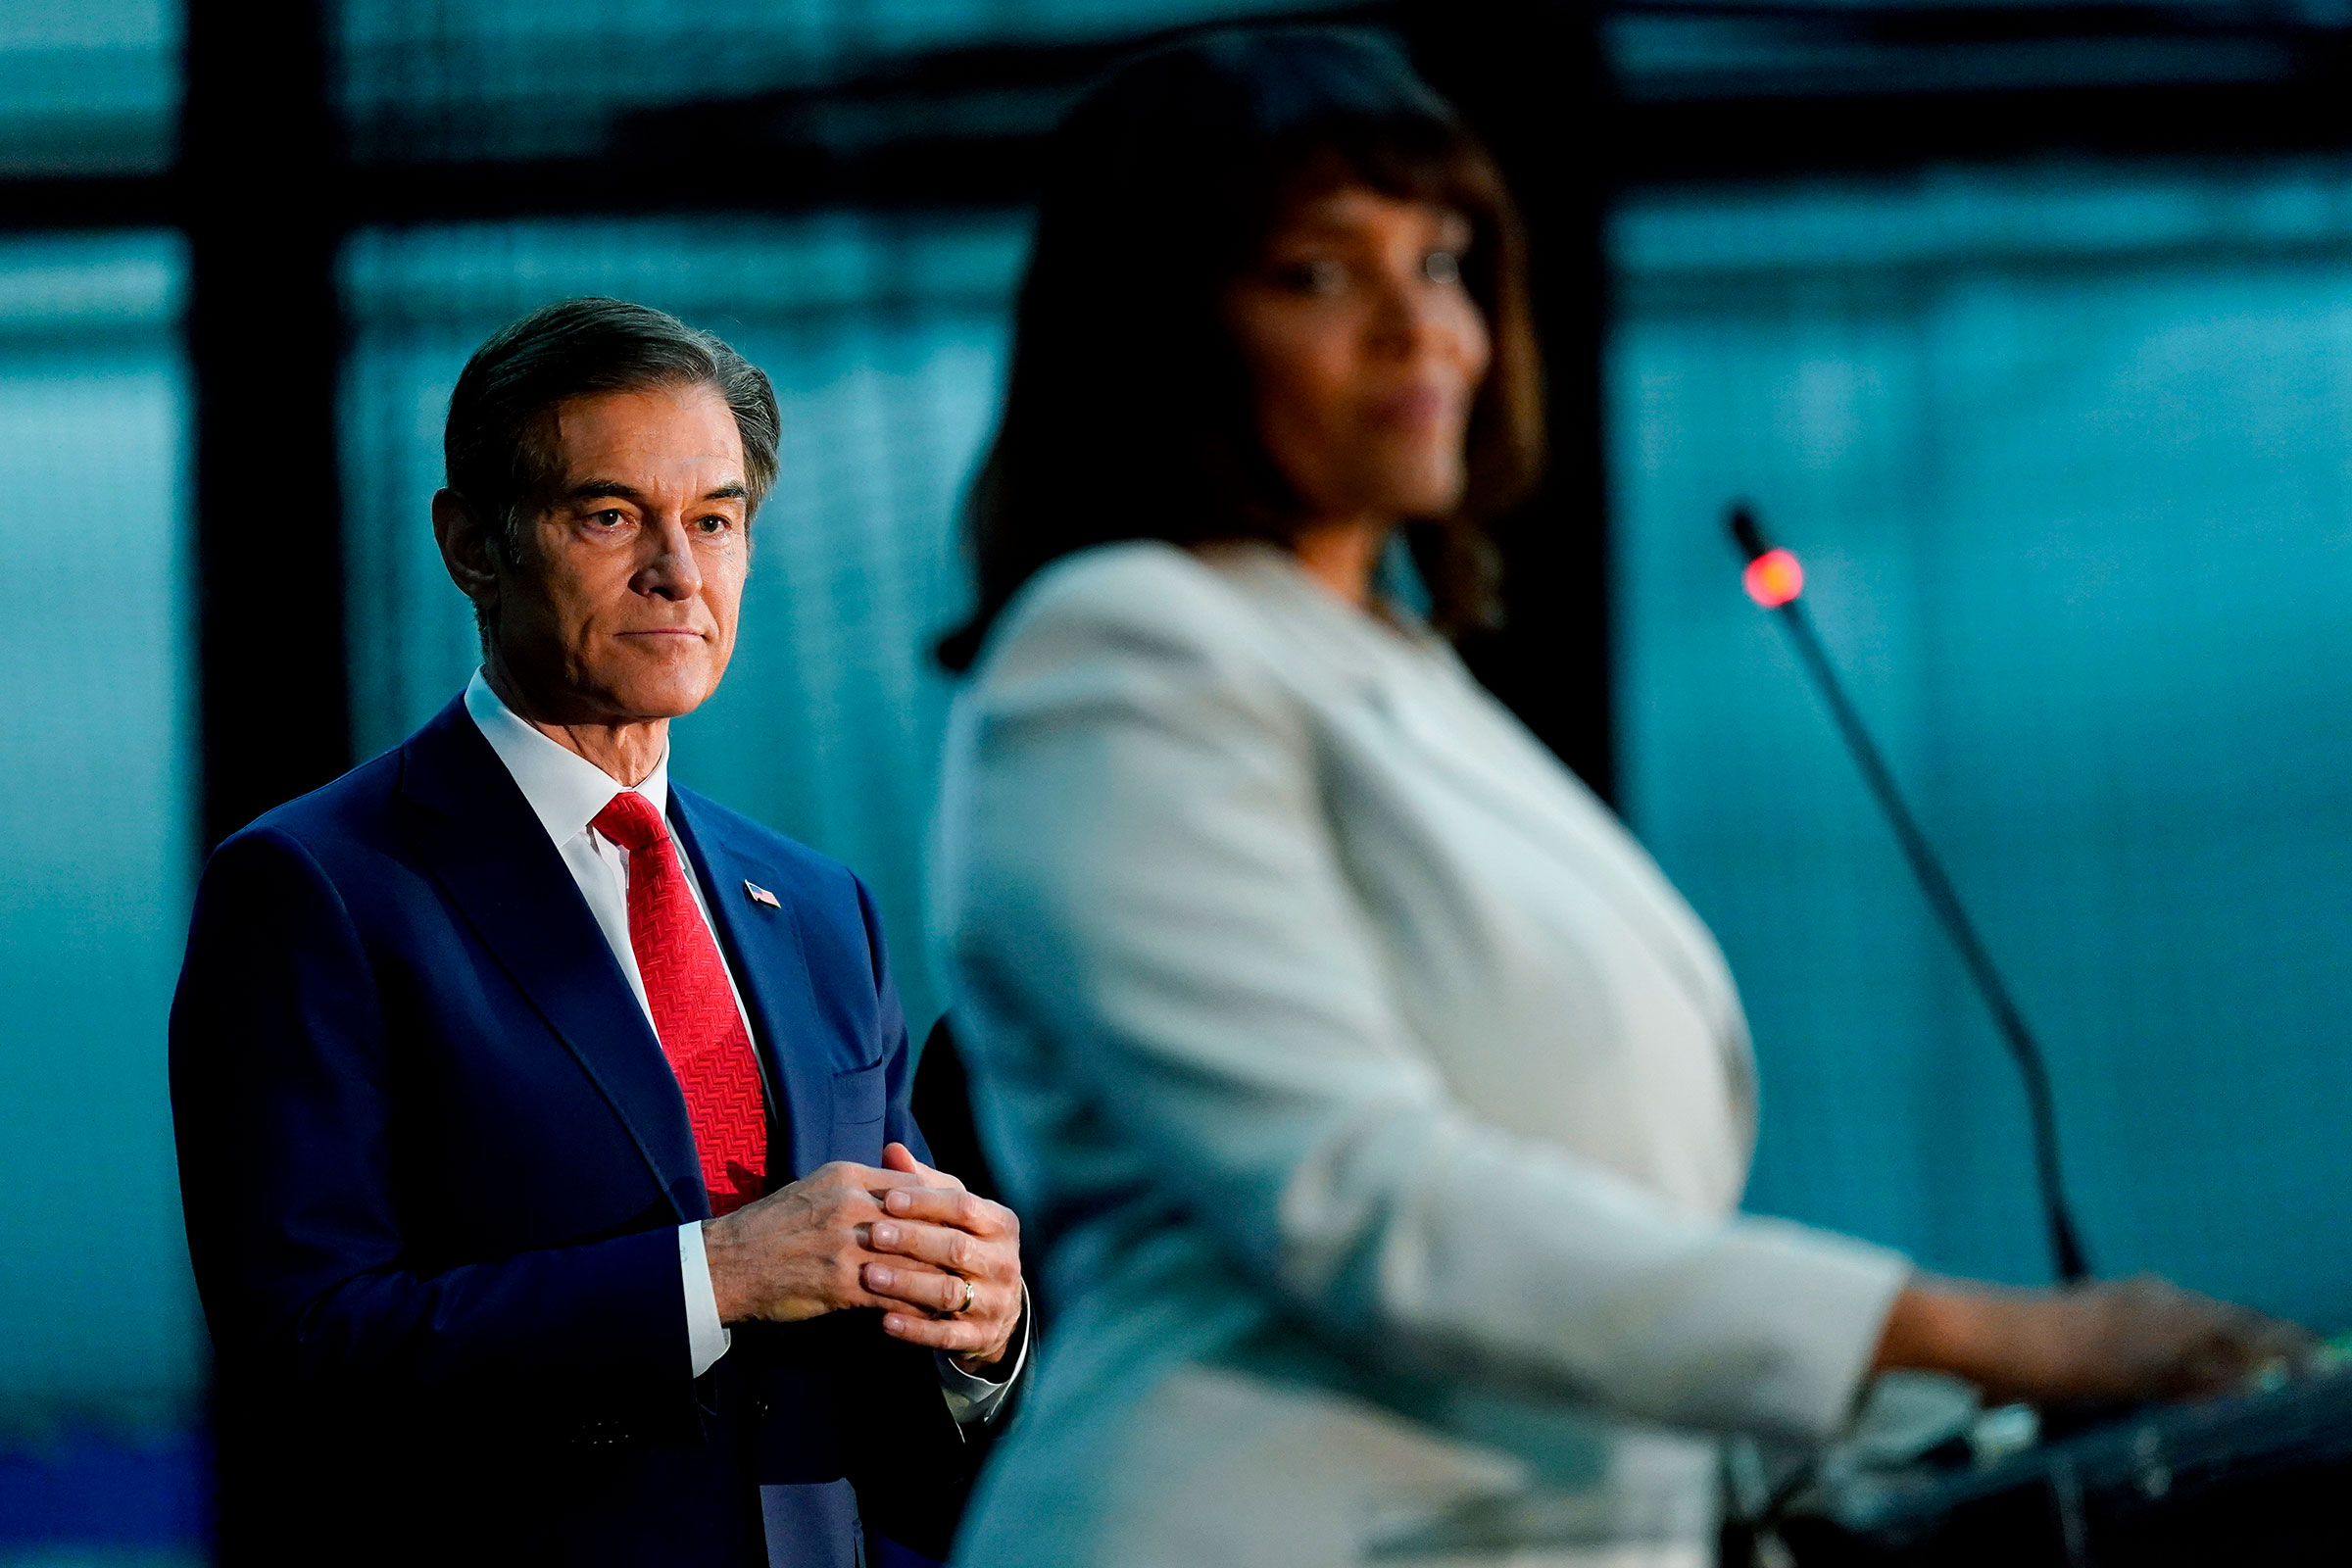 Mehmet Oz, left, looks on as Kathy Barnette finishes her remarks in Newtown, Pa., on May 11, 2022. (Matt Rourke—AP)